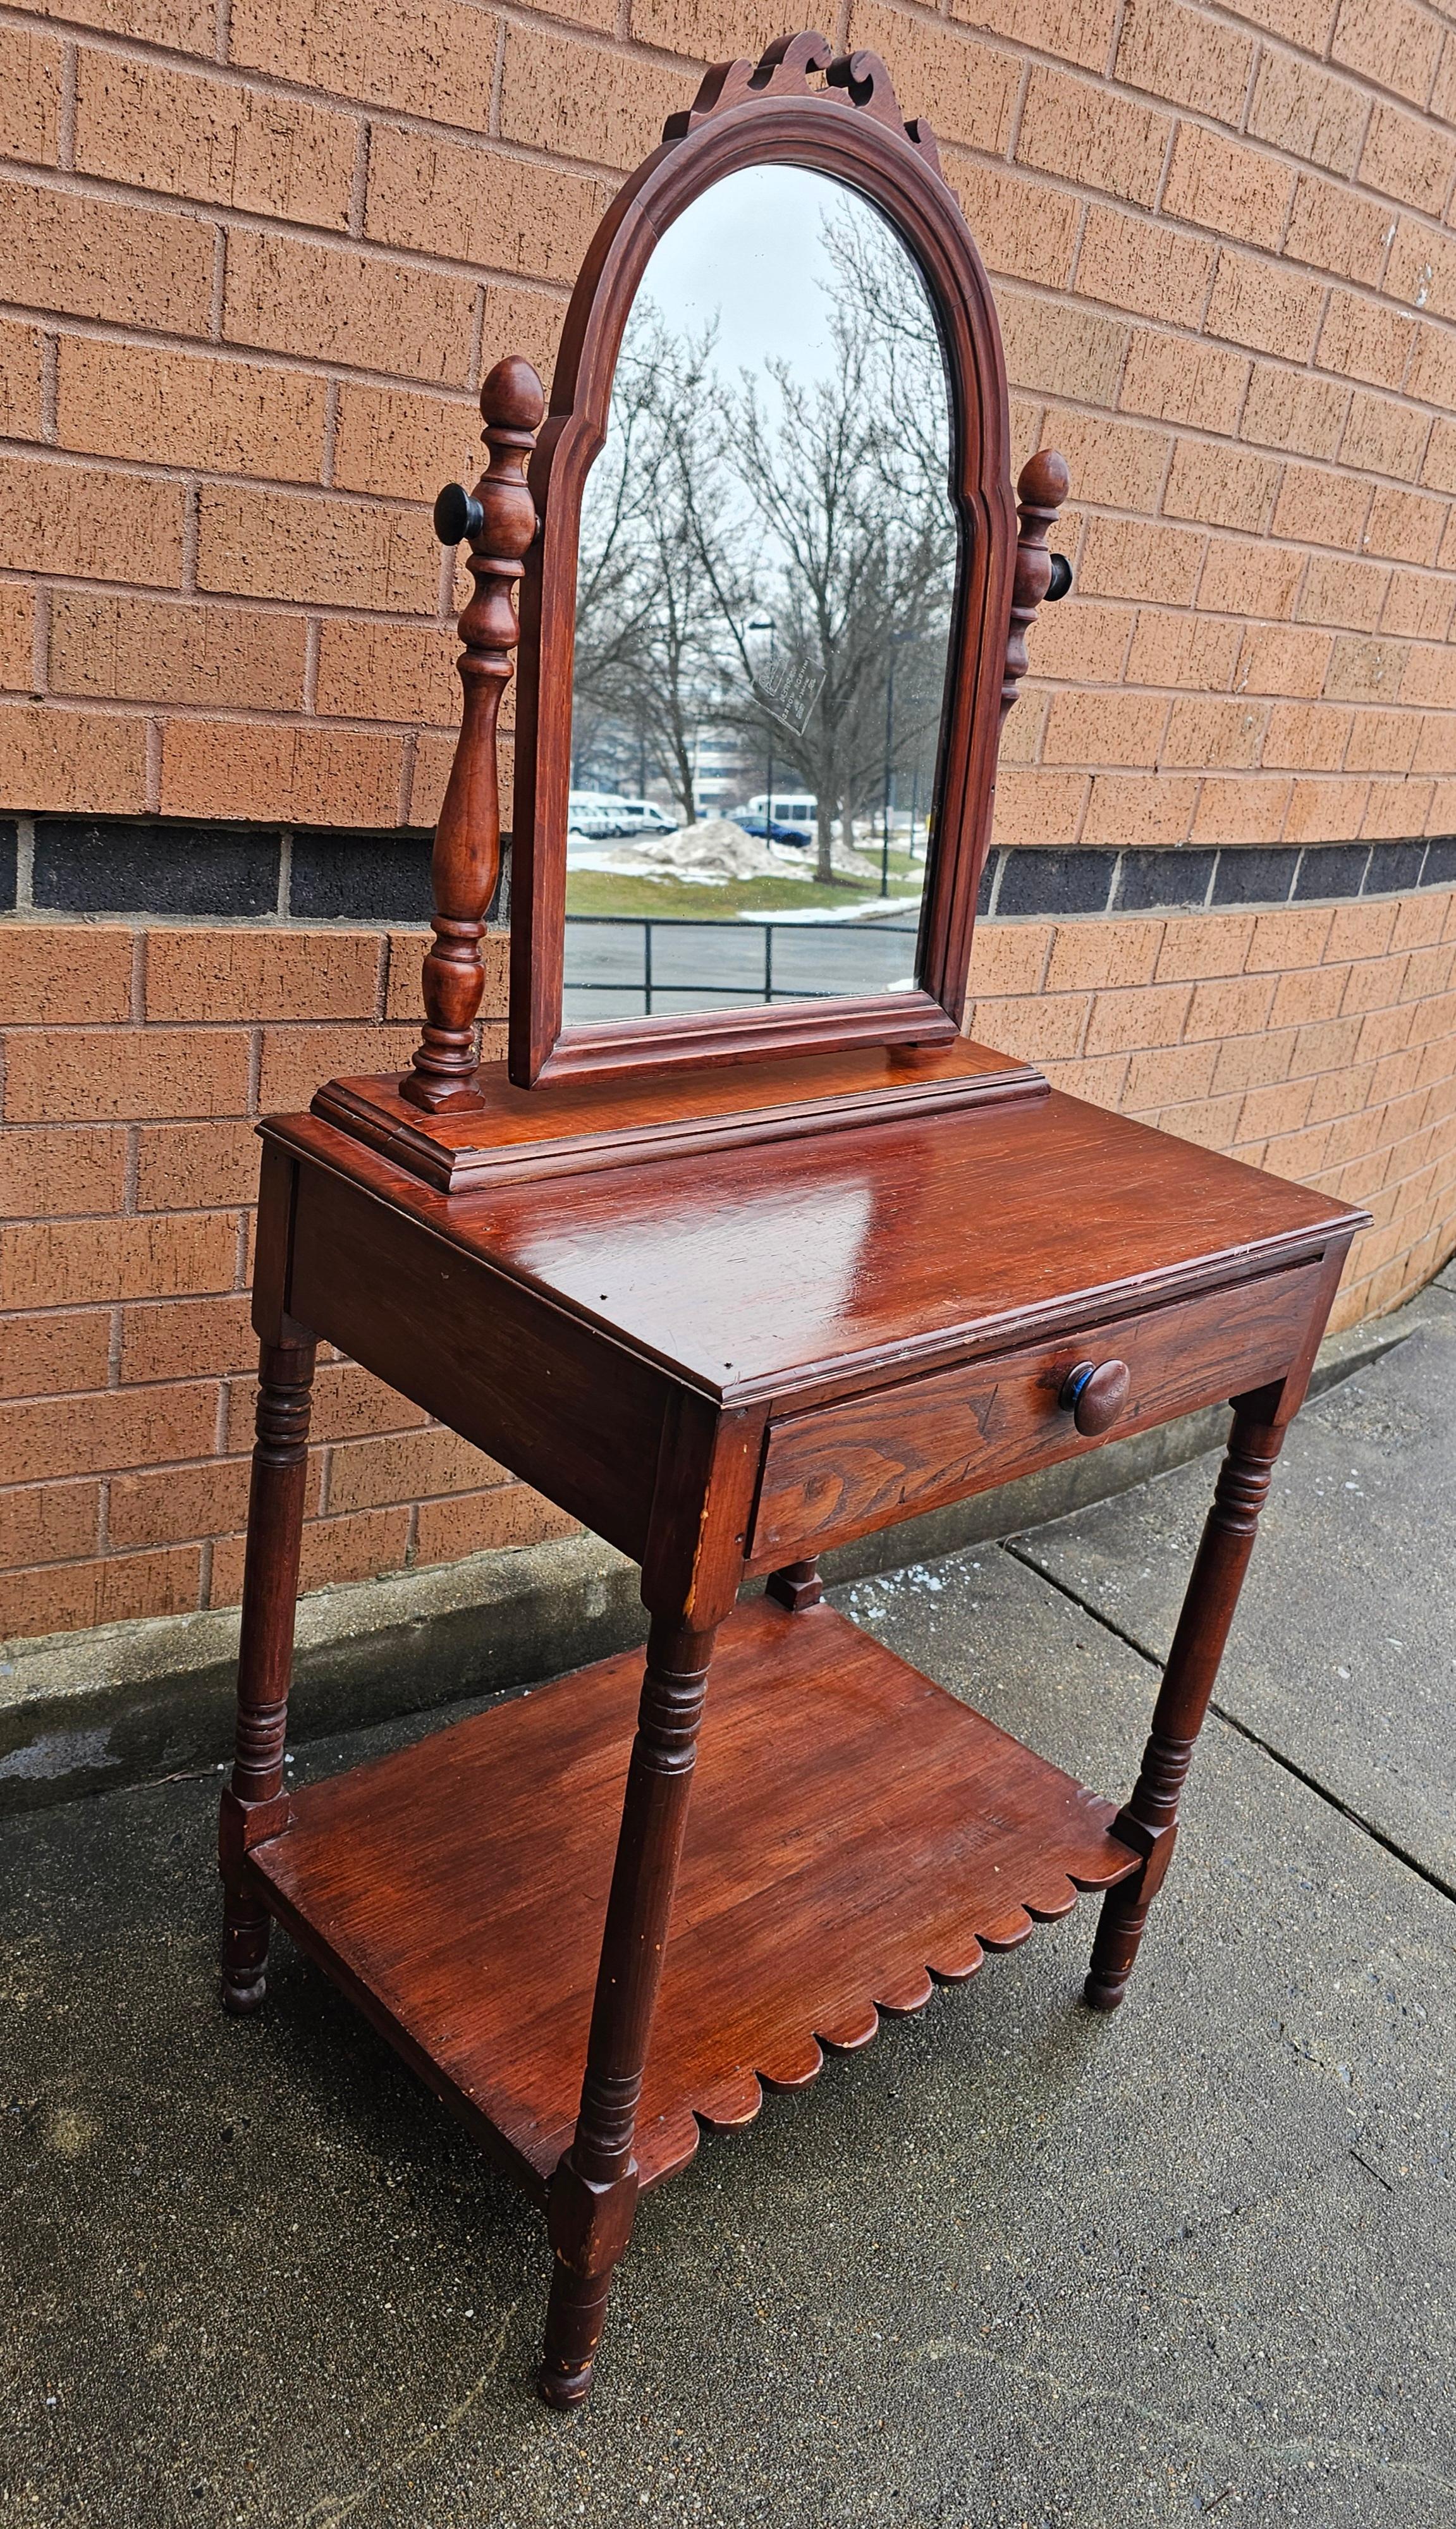 An early 20th Century, probably late 19th century Mahogany si gle drawer Mirrored Washstand. Measures 24.5